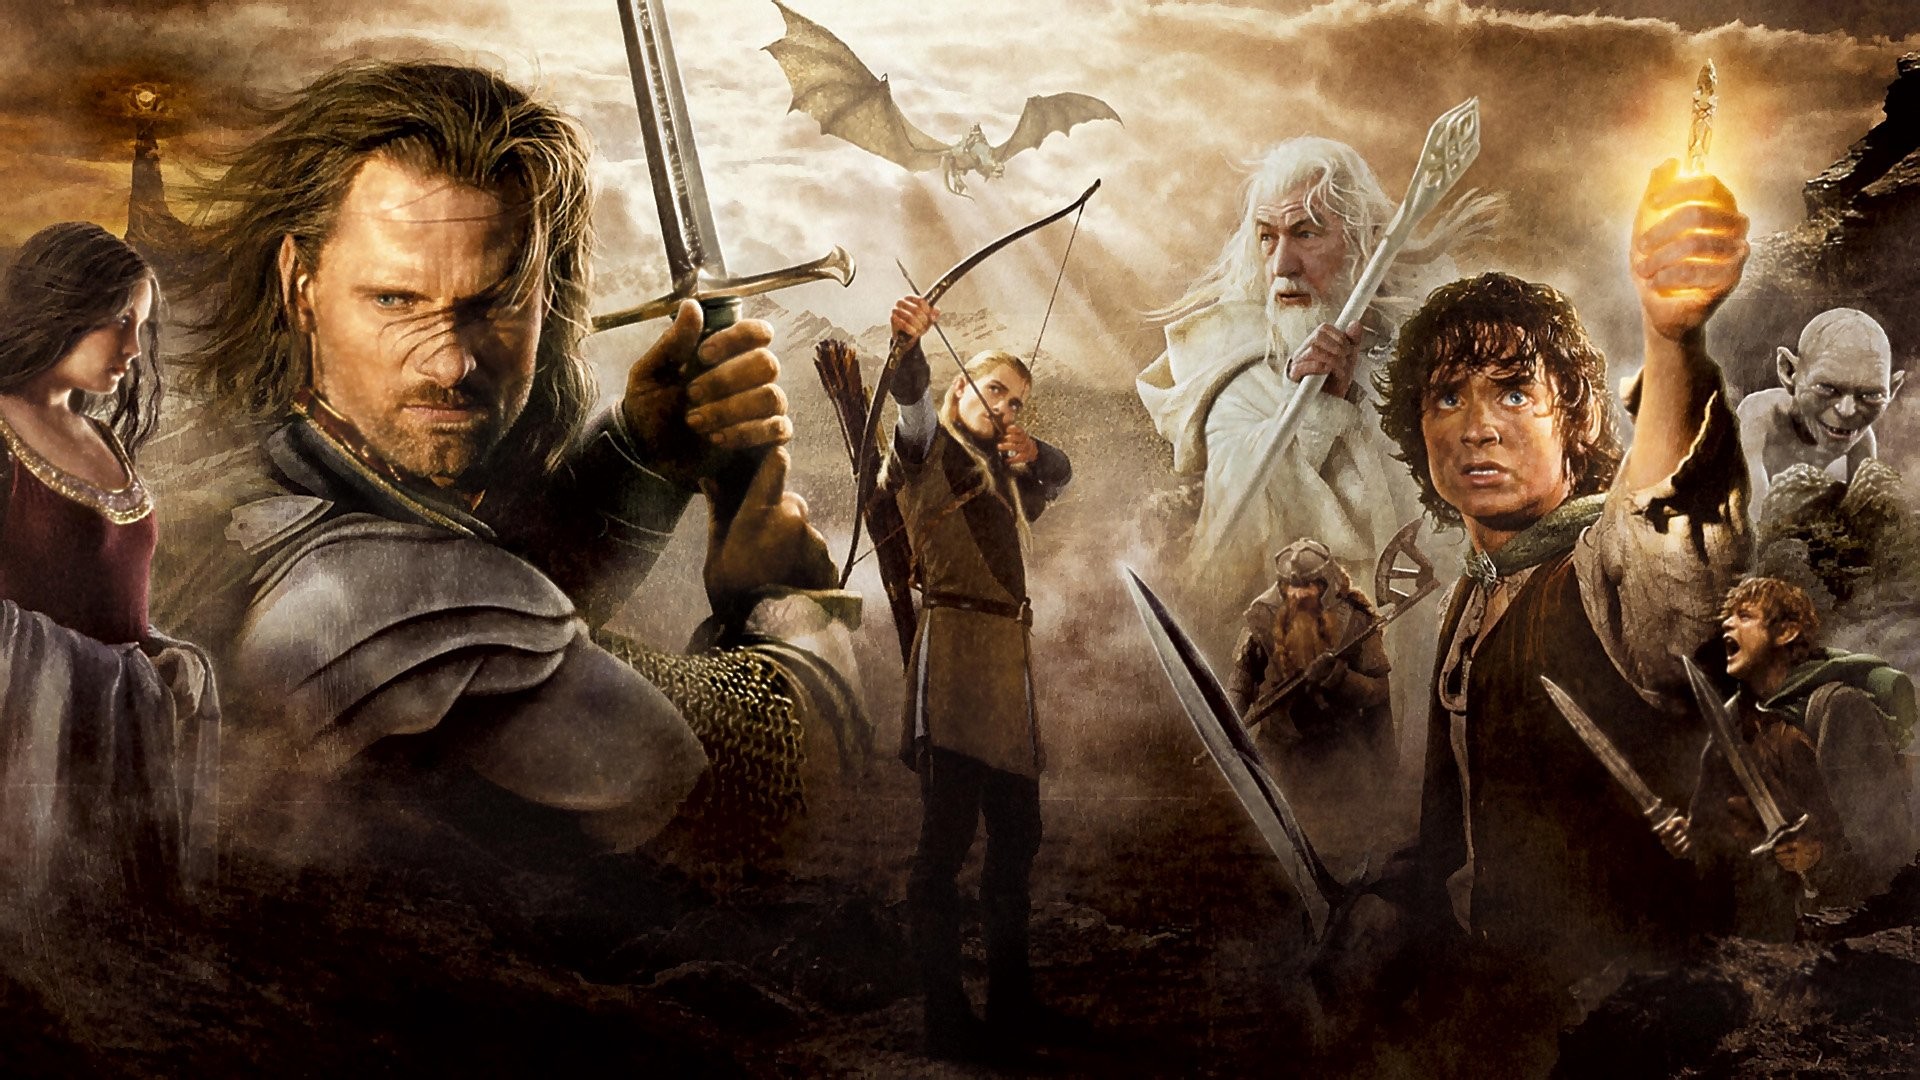 1920x1080 Filme - The Lord of the Rings: The Return of the King John Rhys-